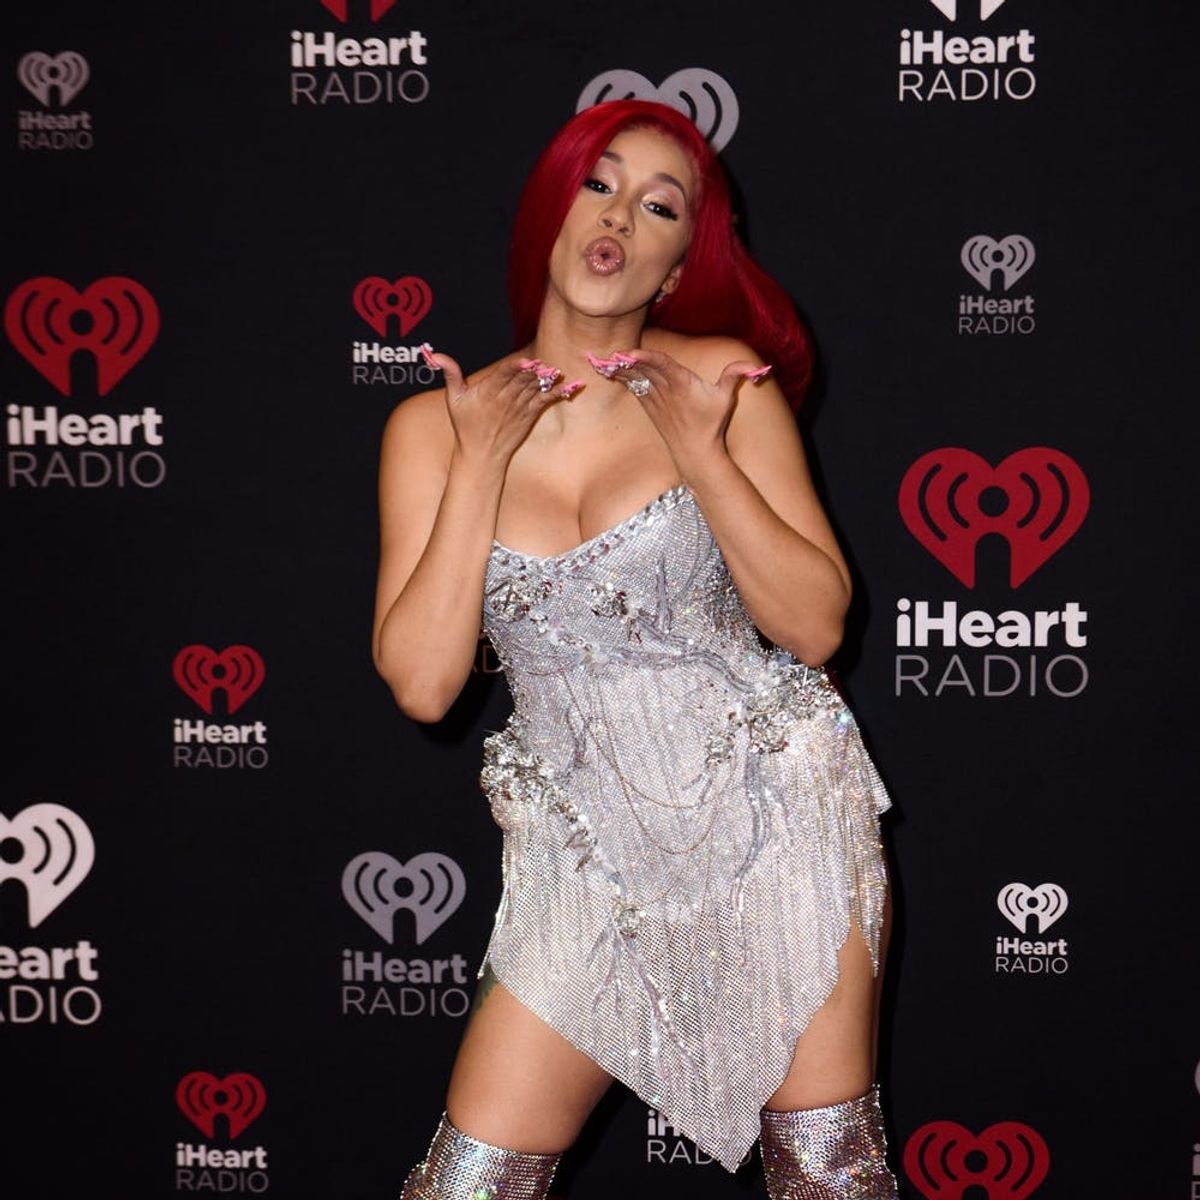 Cardi B Is Partnering With Steve Madden on a New Collection